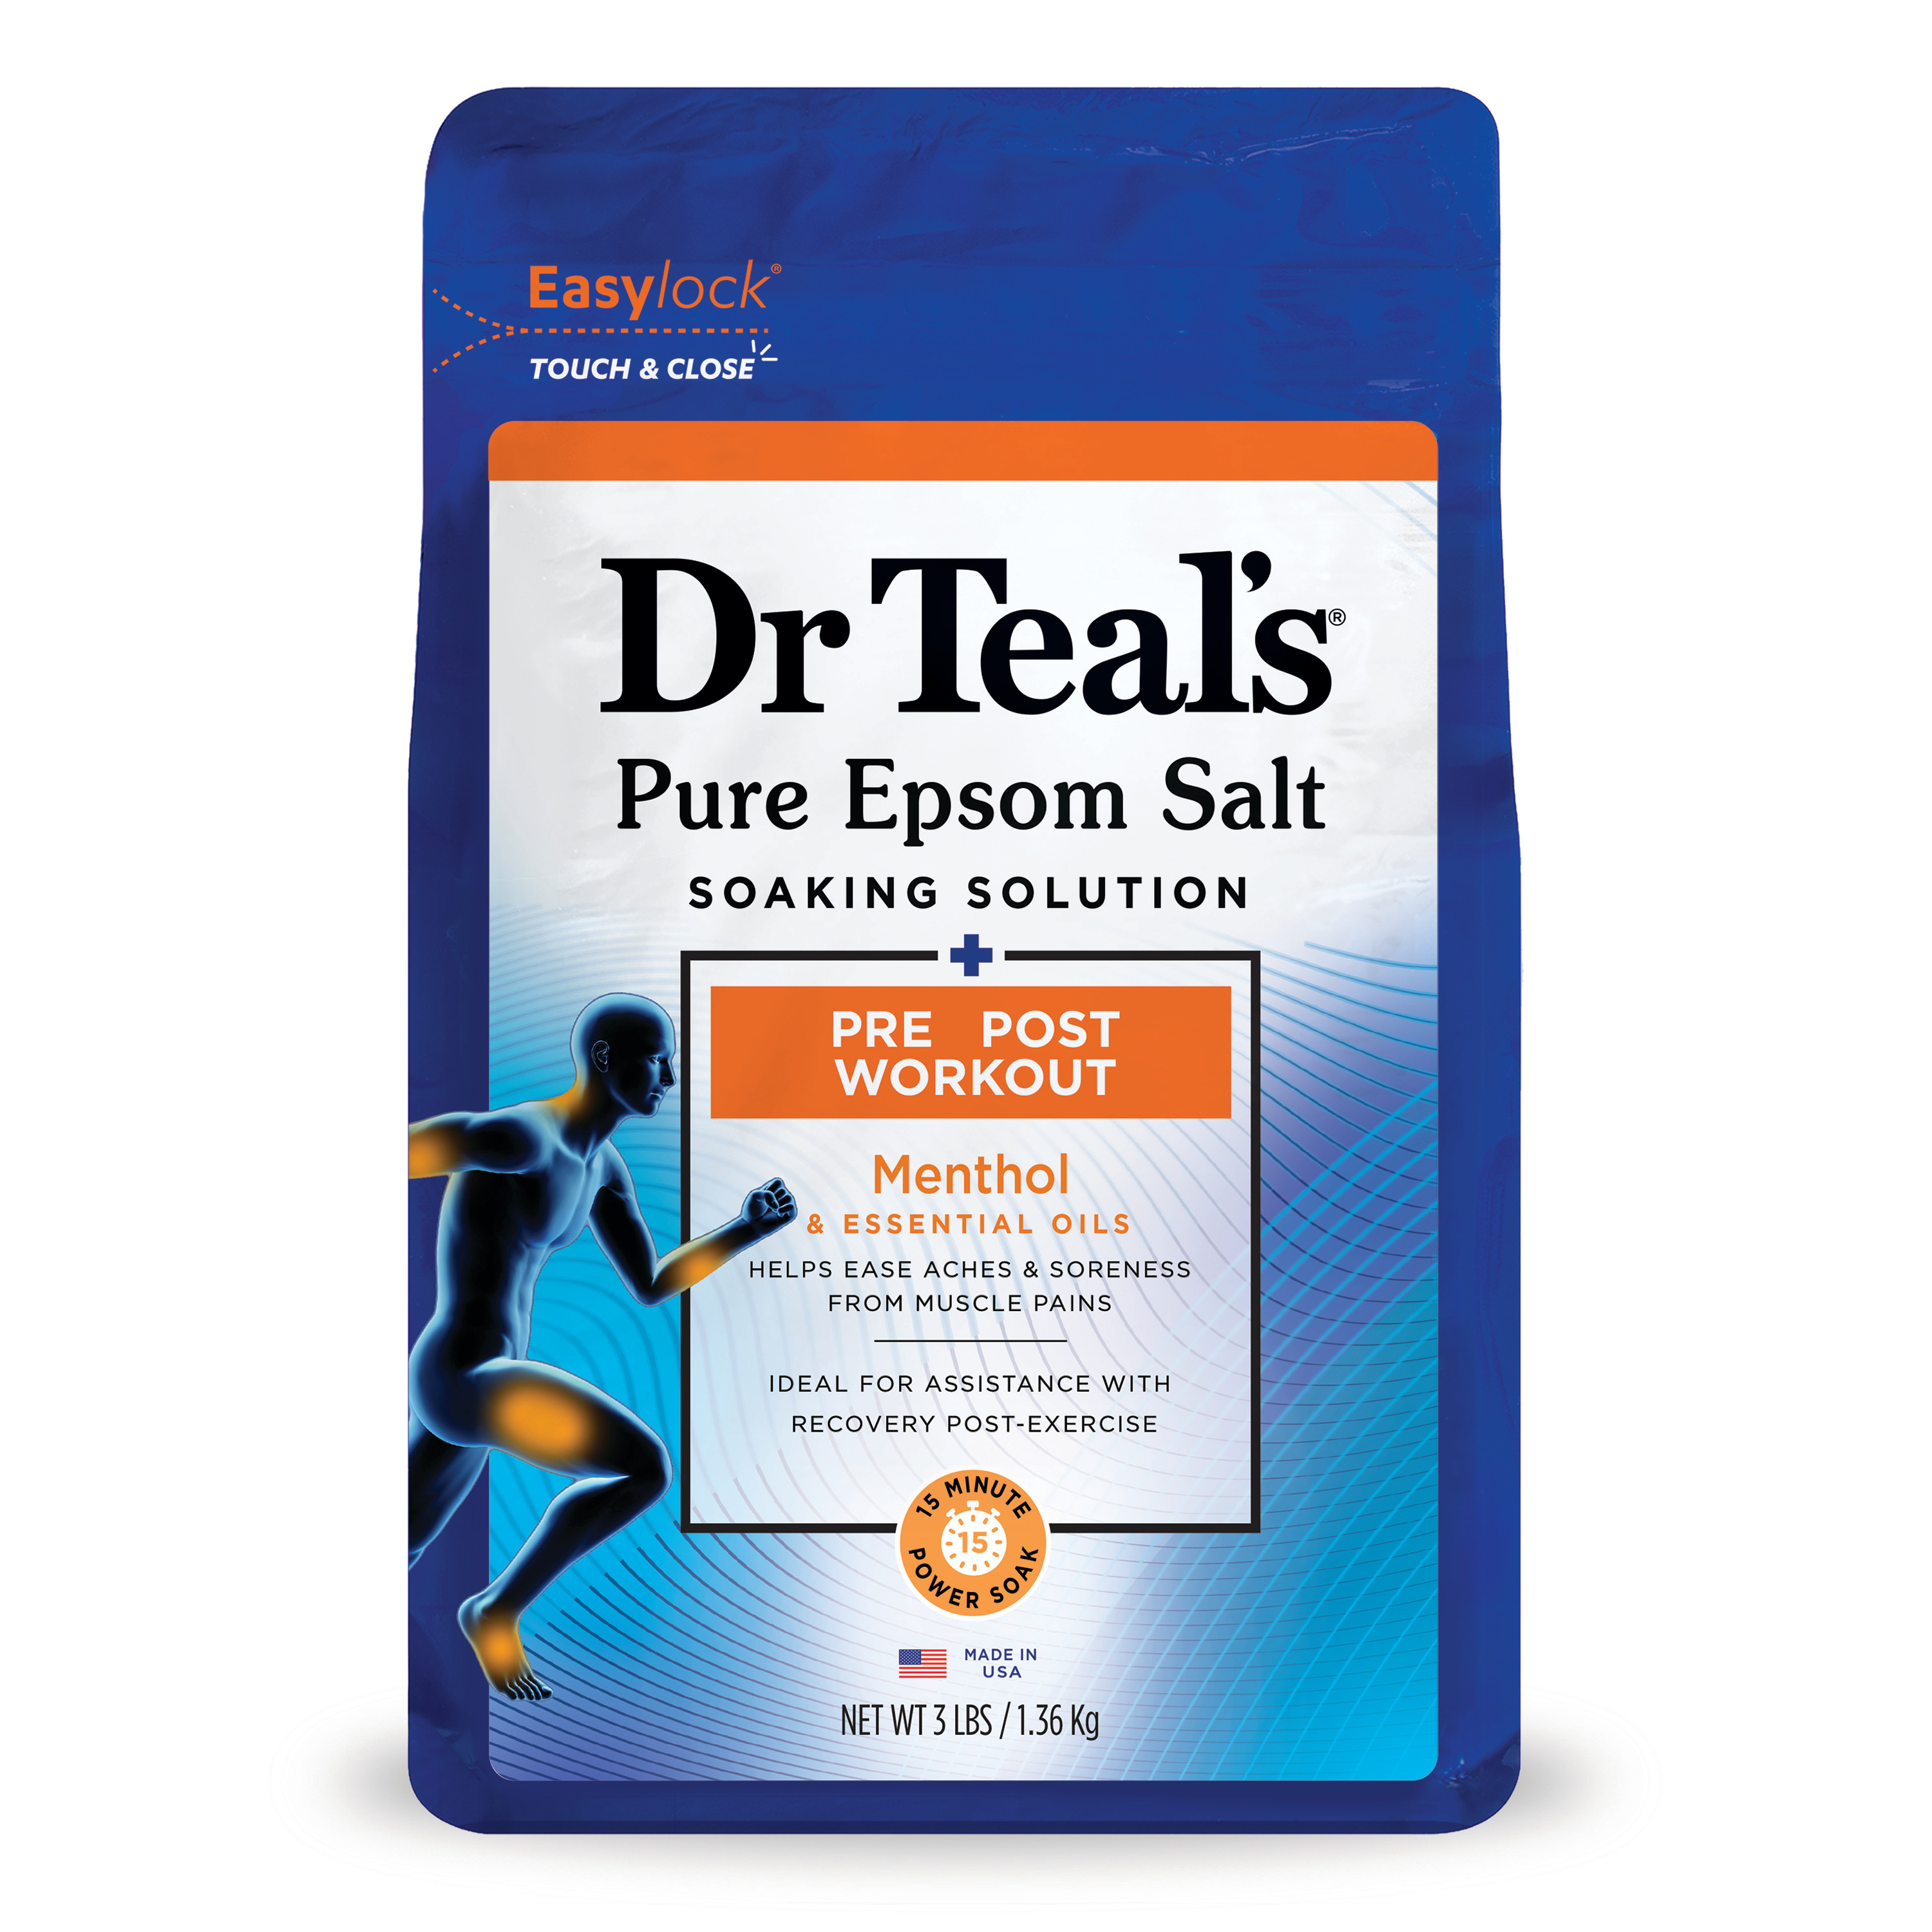 Dr Teal's Pure Epsom Salt Soak, Pre & Post Workout with Menthol, 3 lbs - image 1 of 8